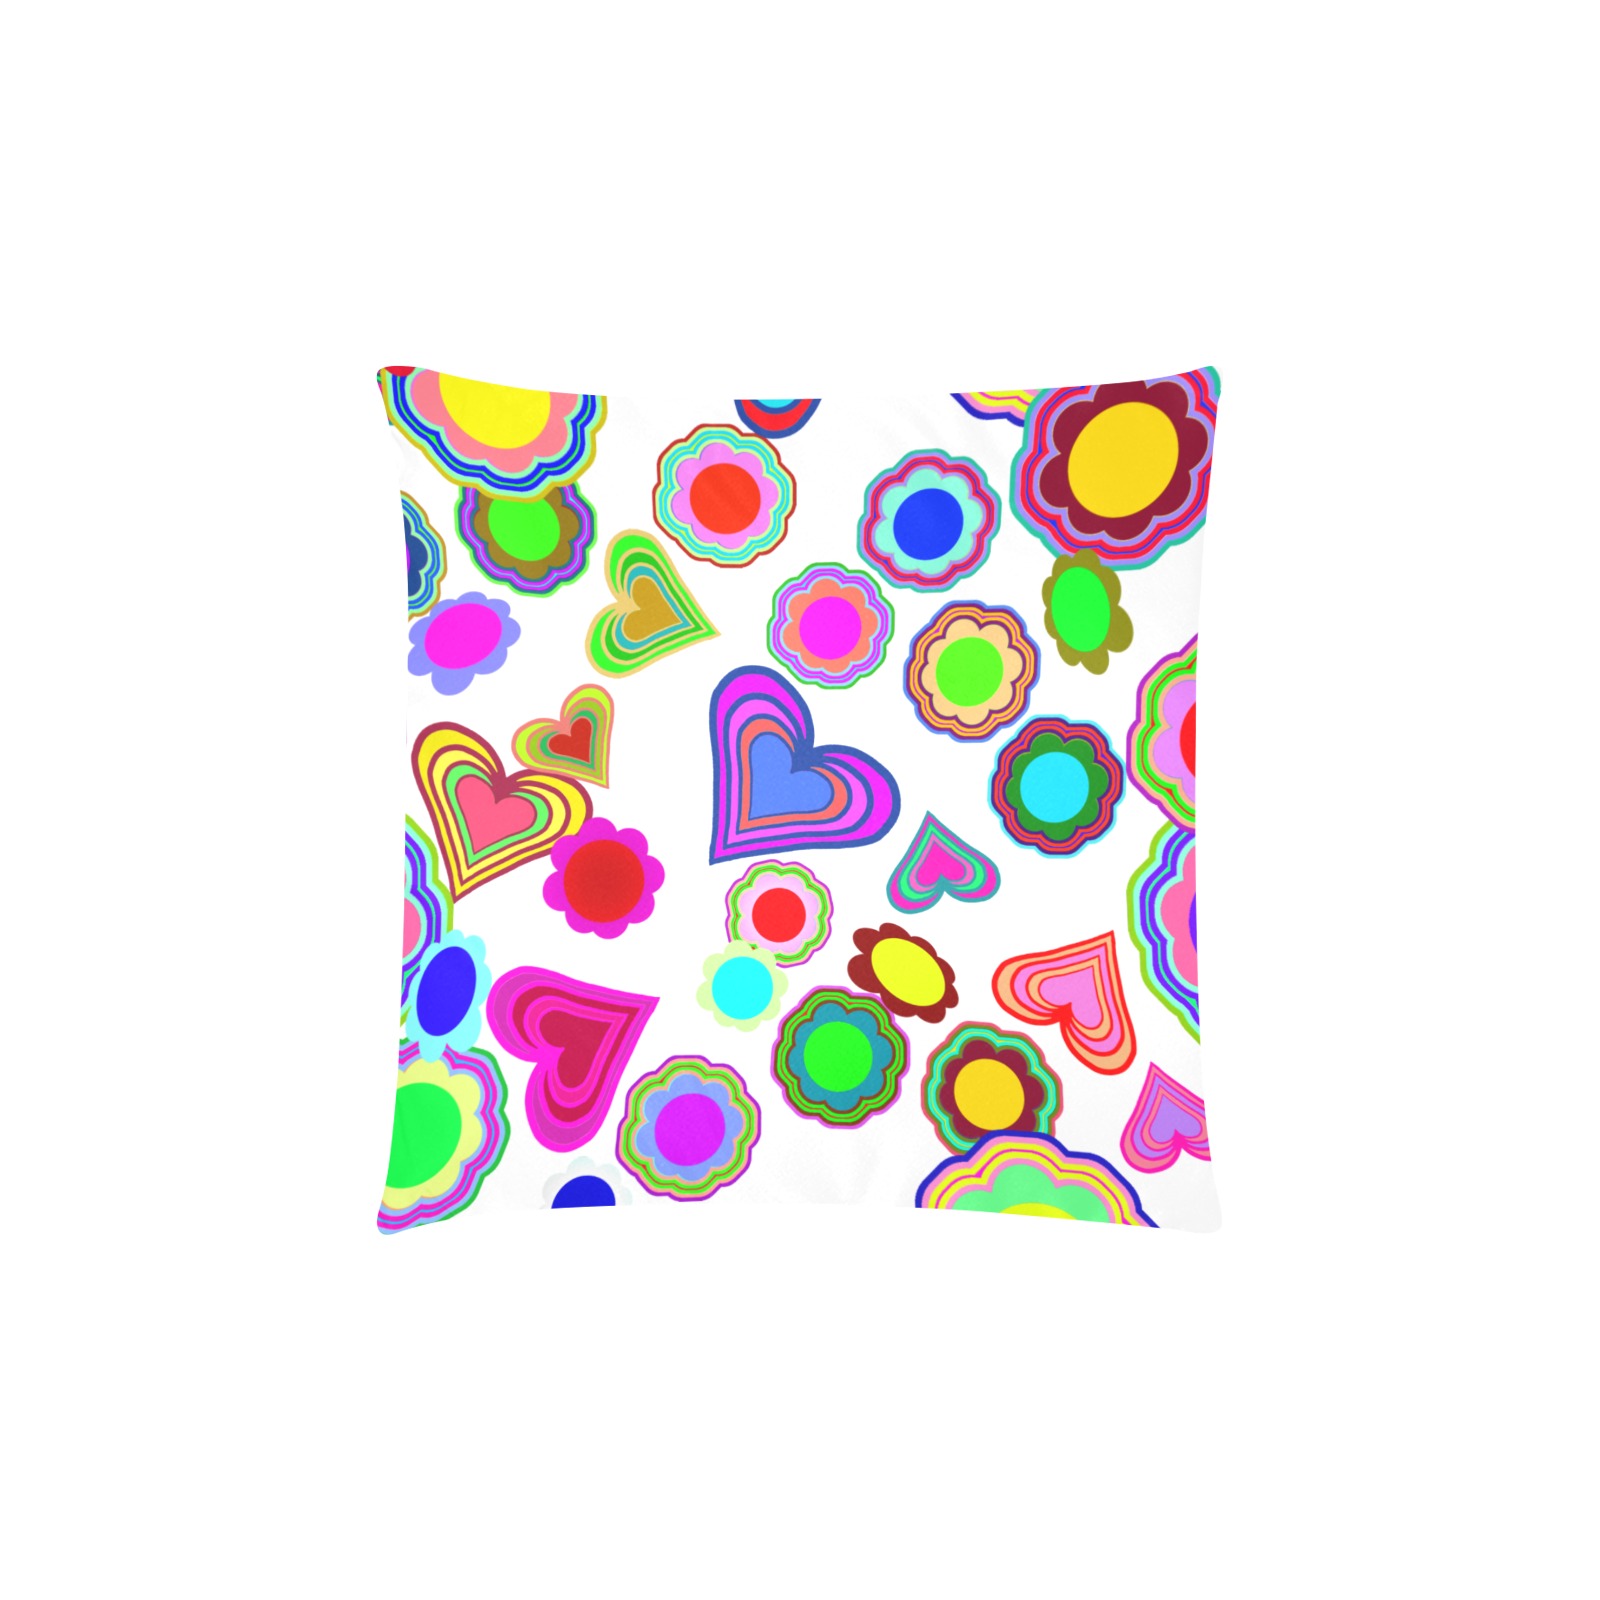 Groovy Hearts and Flowers White Custom Zippered Pillow Cases 16"x16" (Two Sides)